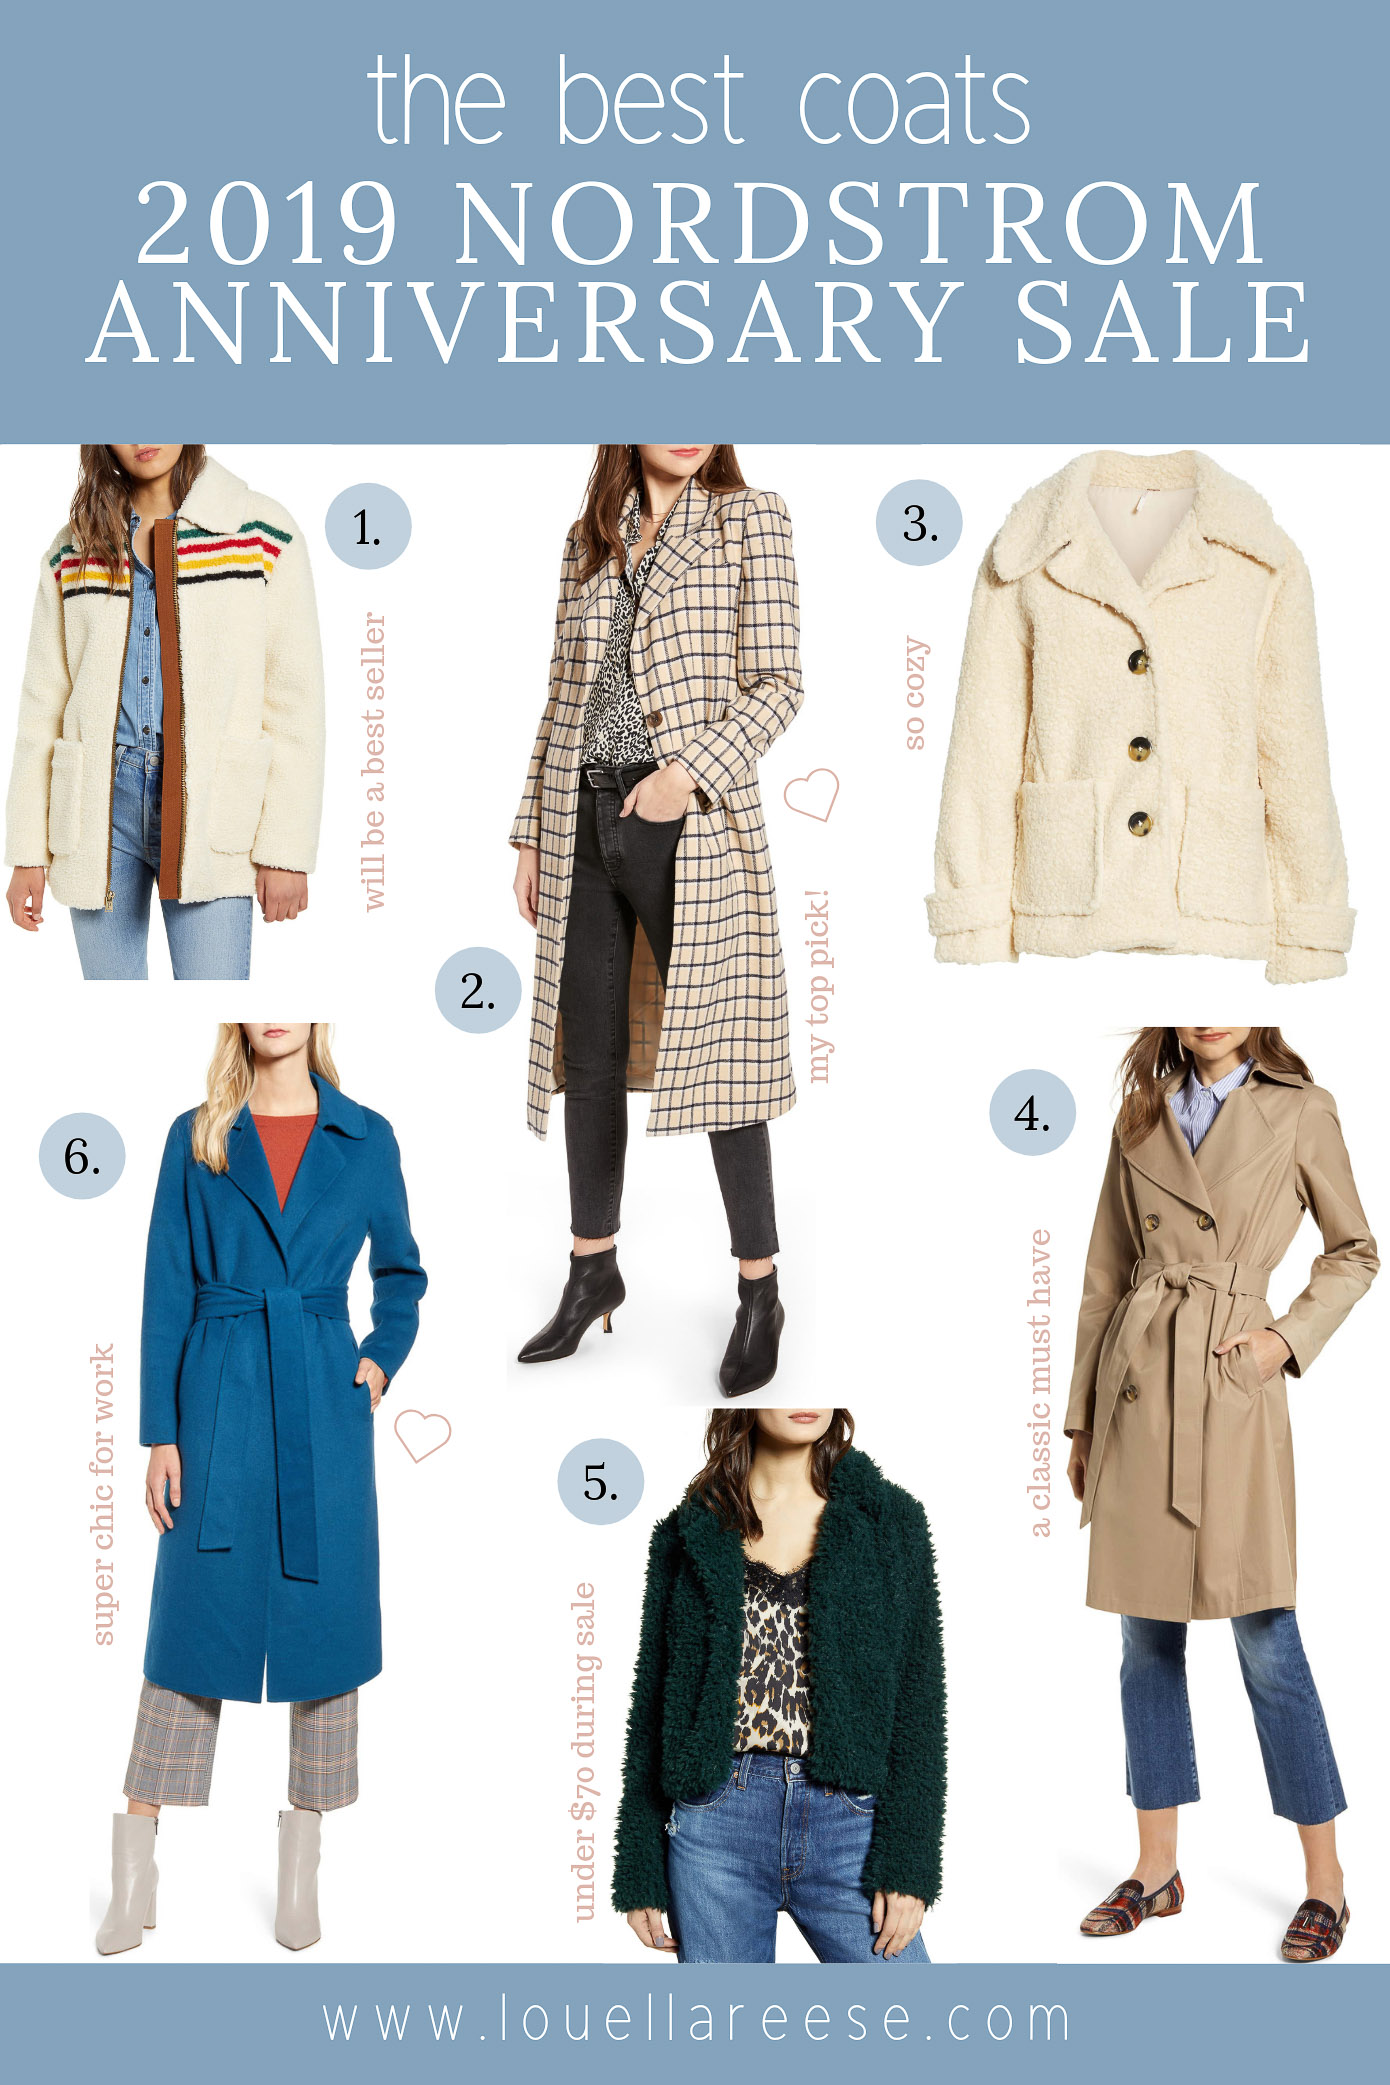 2019 Nordstrom Anniversary Sale Best Coats | The BEST Coats from the 2019 Nordstrom Anniversary Sale | Louella Reese